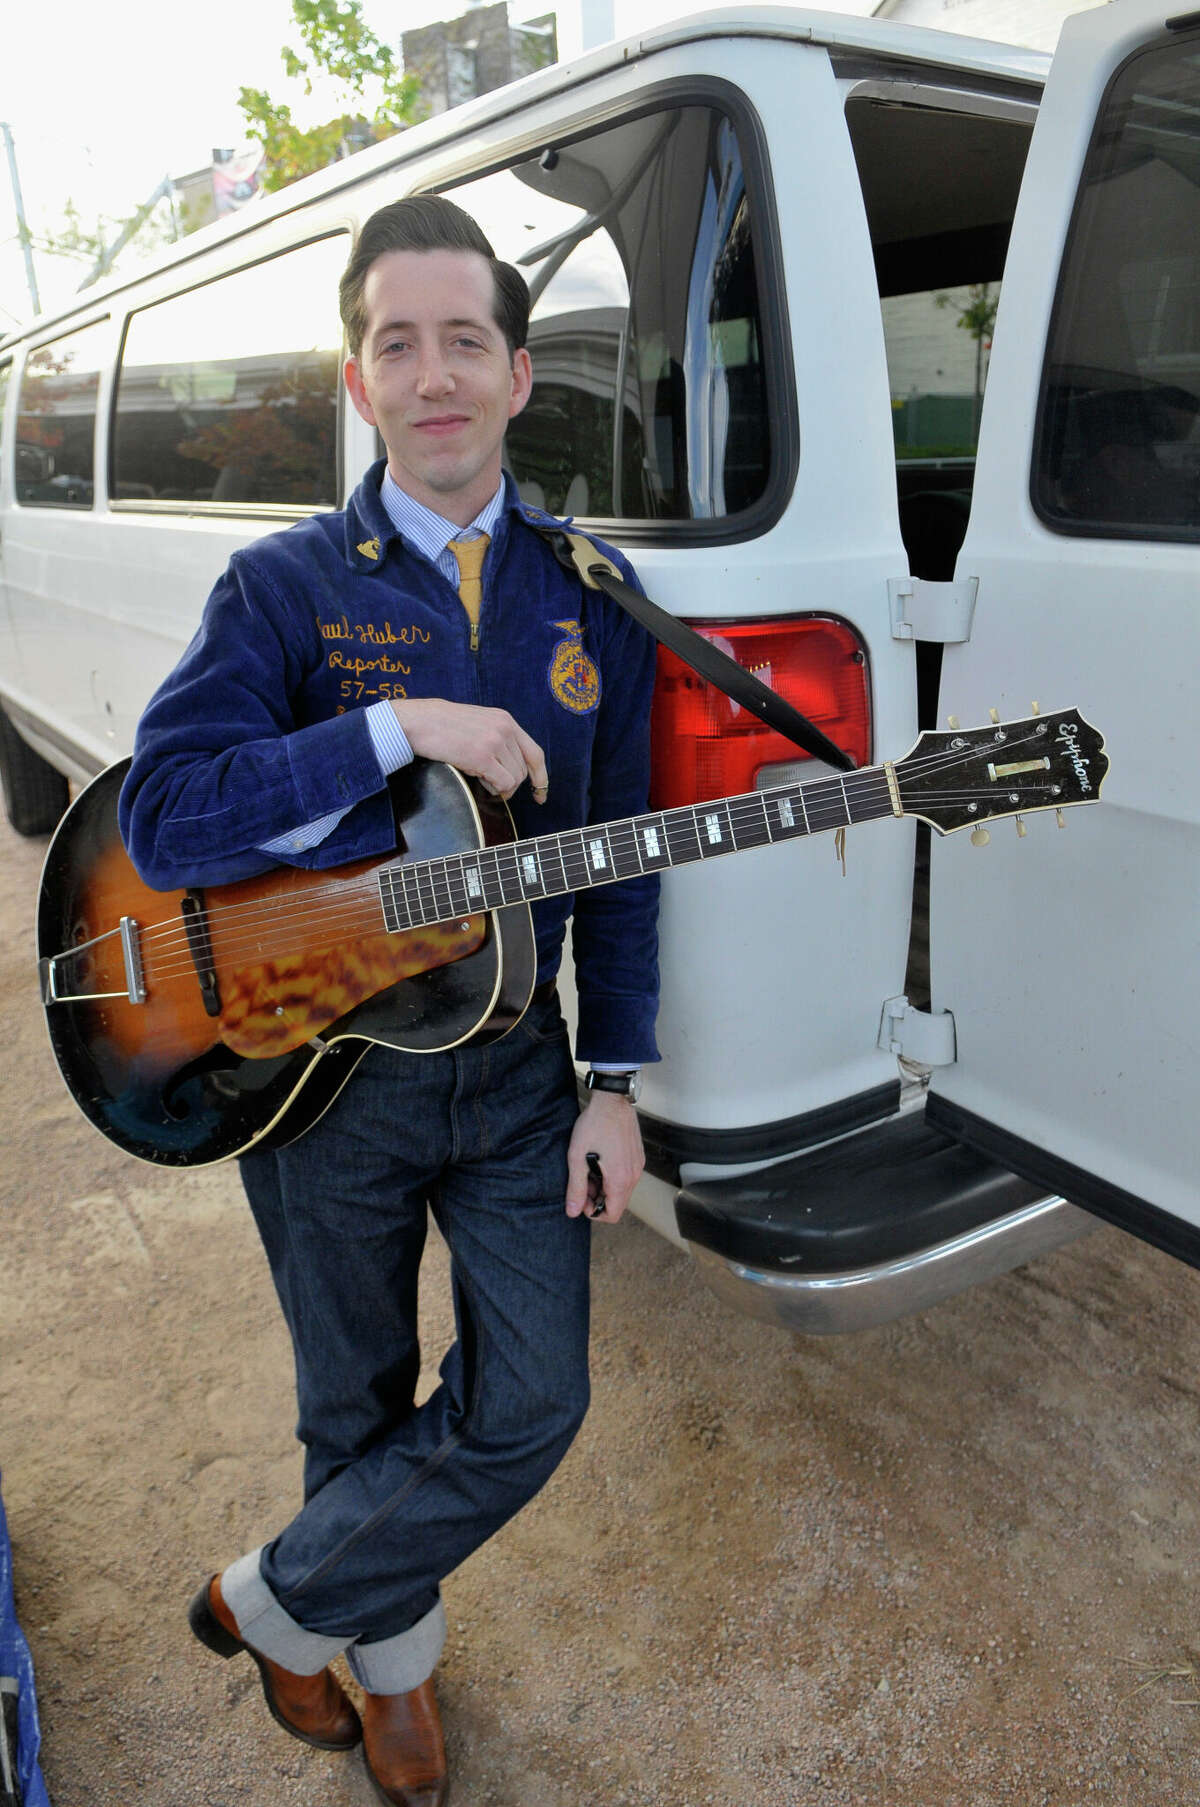 Pokey LaFarge wears an old fashioned haircut with cuffed jeans while he leans against a van holding his guitar.